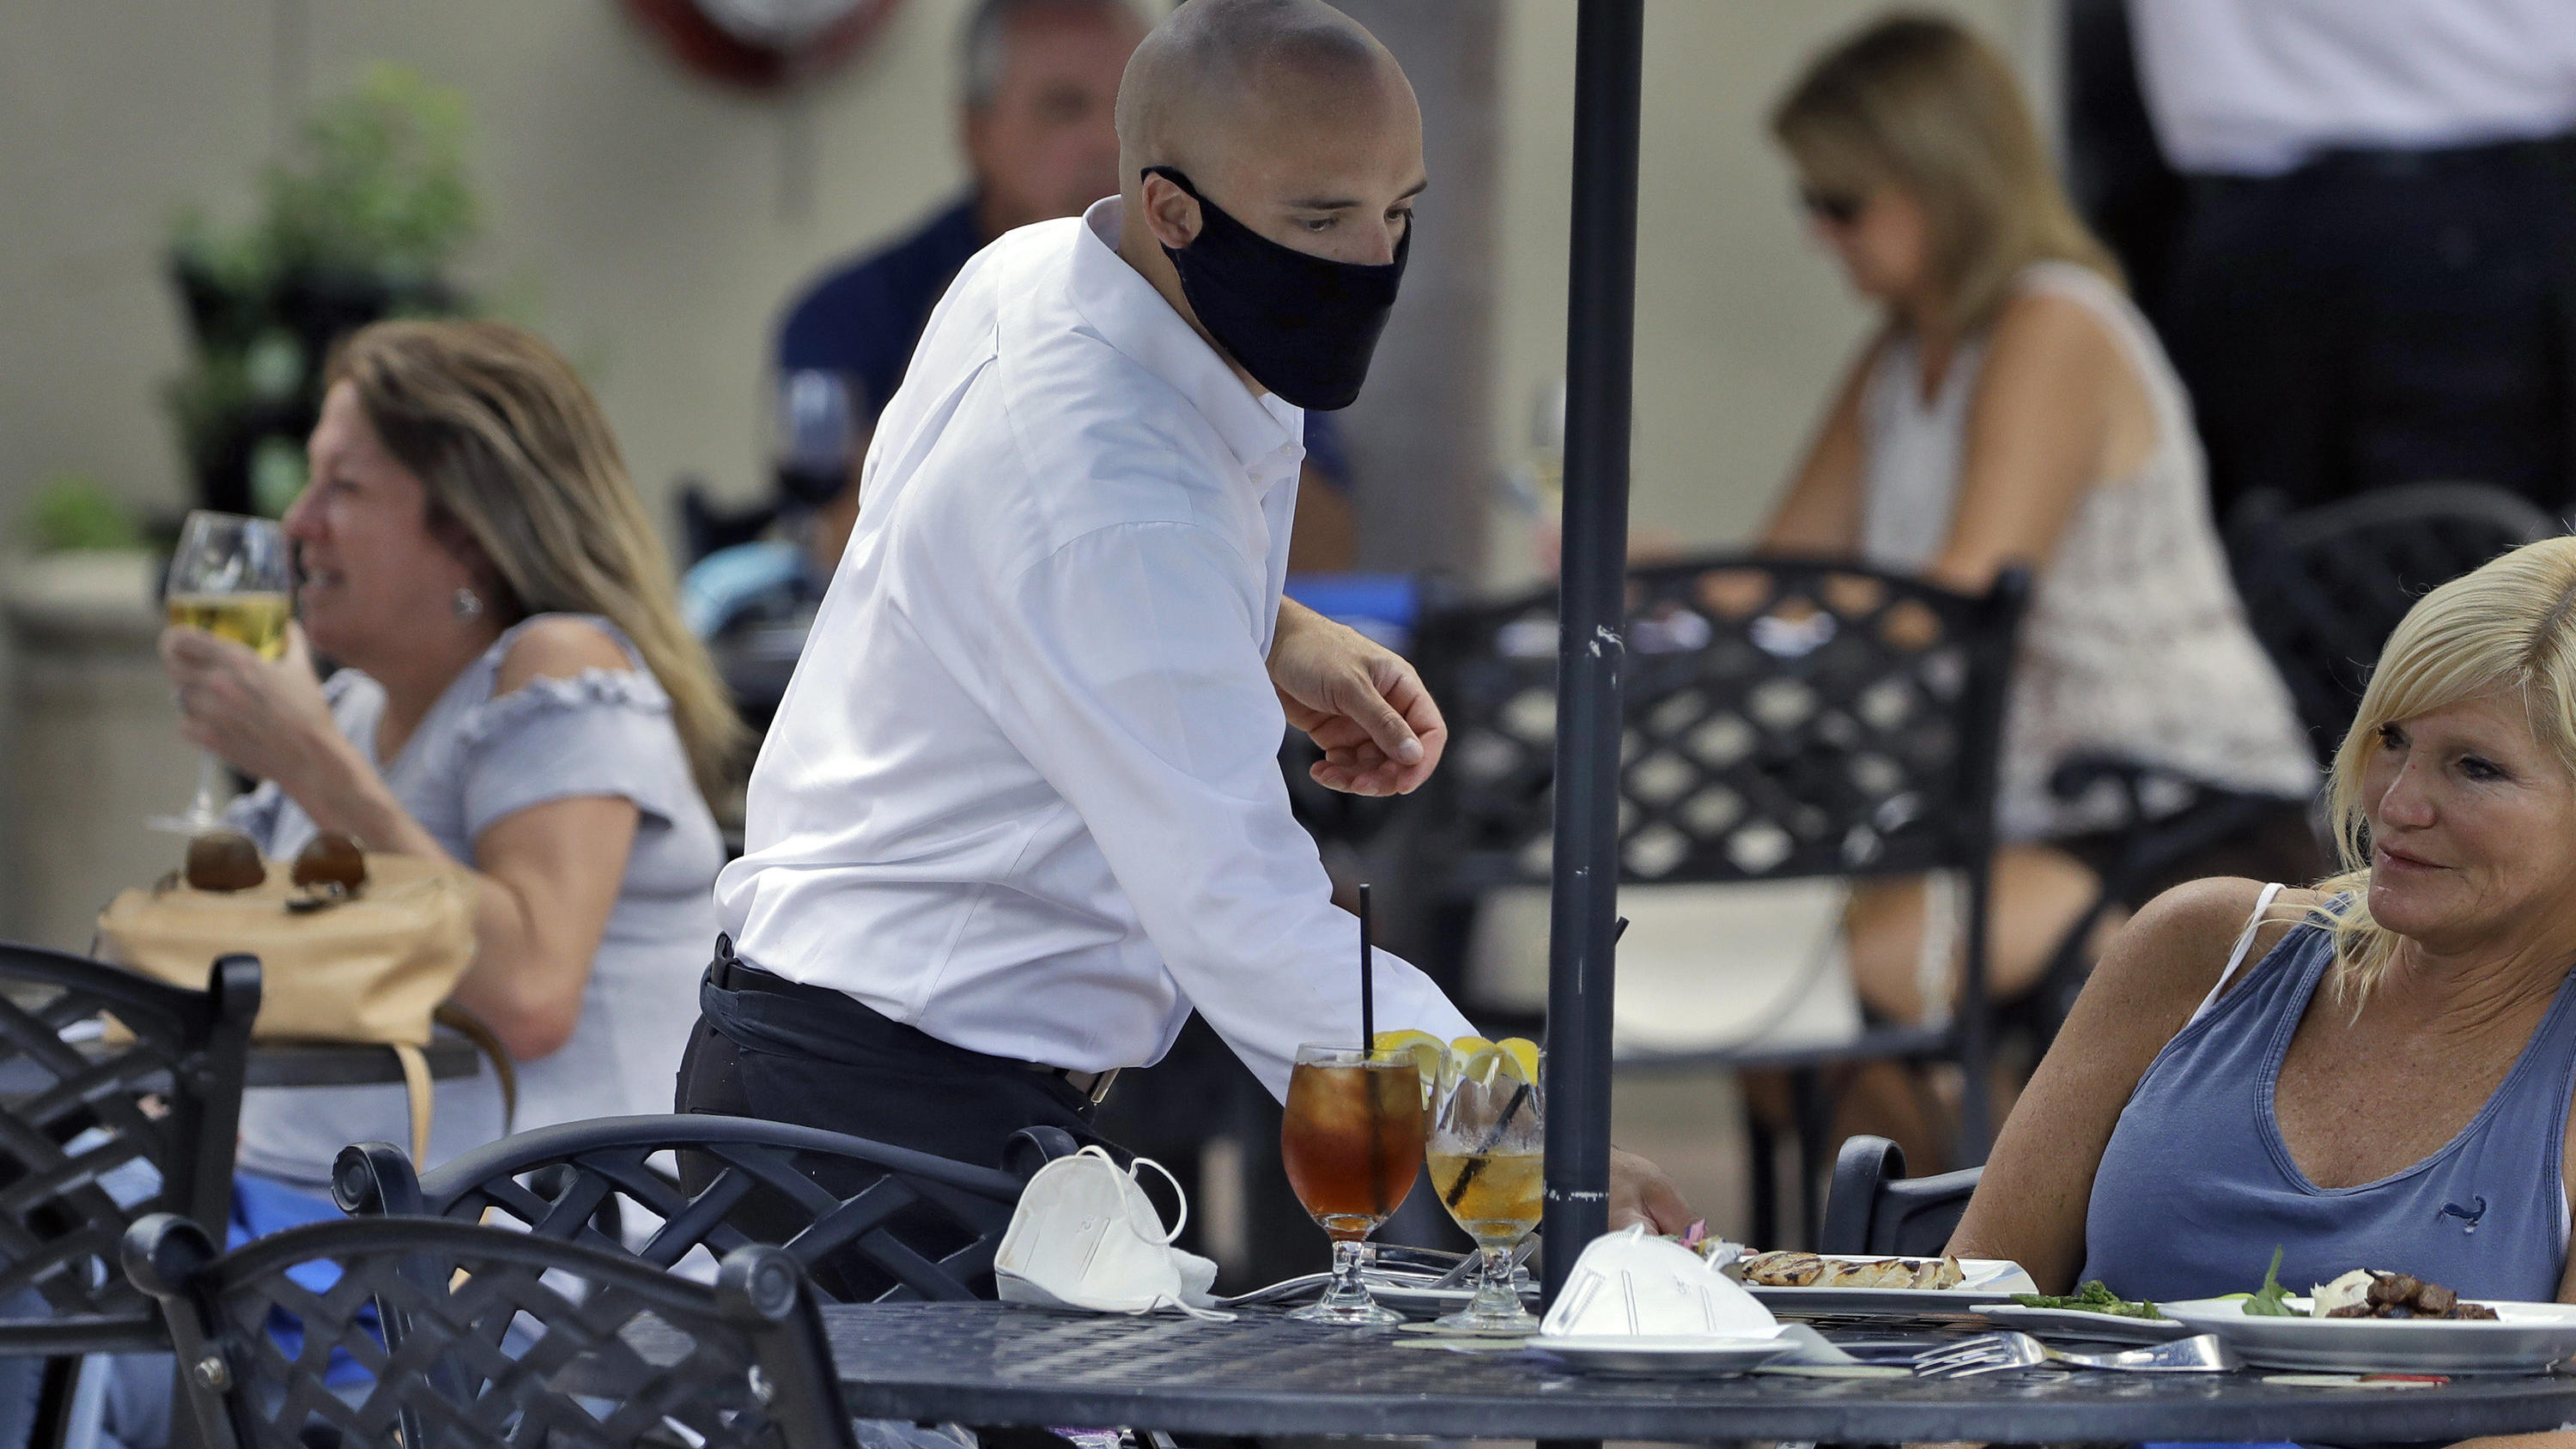 A foodserver at the Parkshore Grill restaurant wears a protective face mask as he waits on customers Monday, May 4, 2020, in St. Petersburg, Fla. Several restaurants are reopening with a 25apacity as part of Florida Gov. Ron DeSantis' plan to stop th